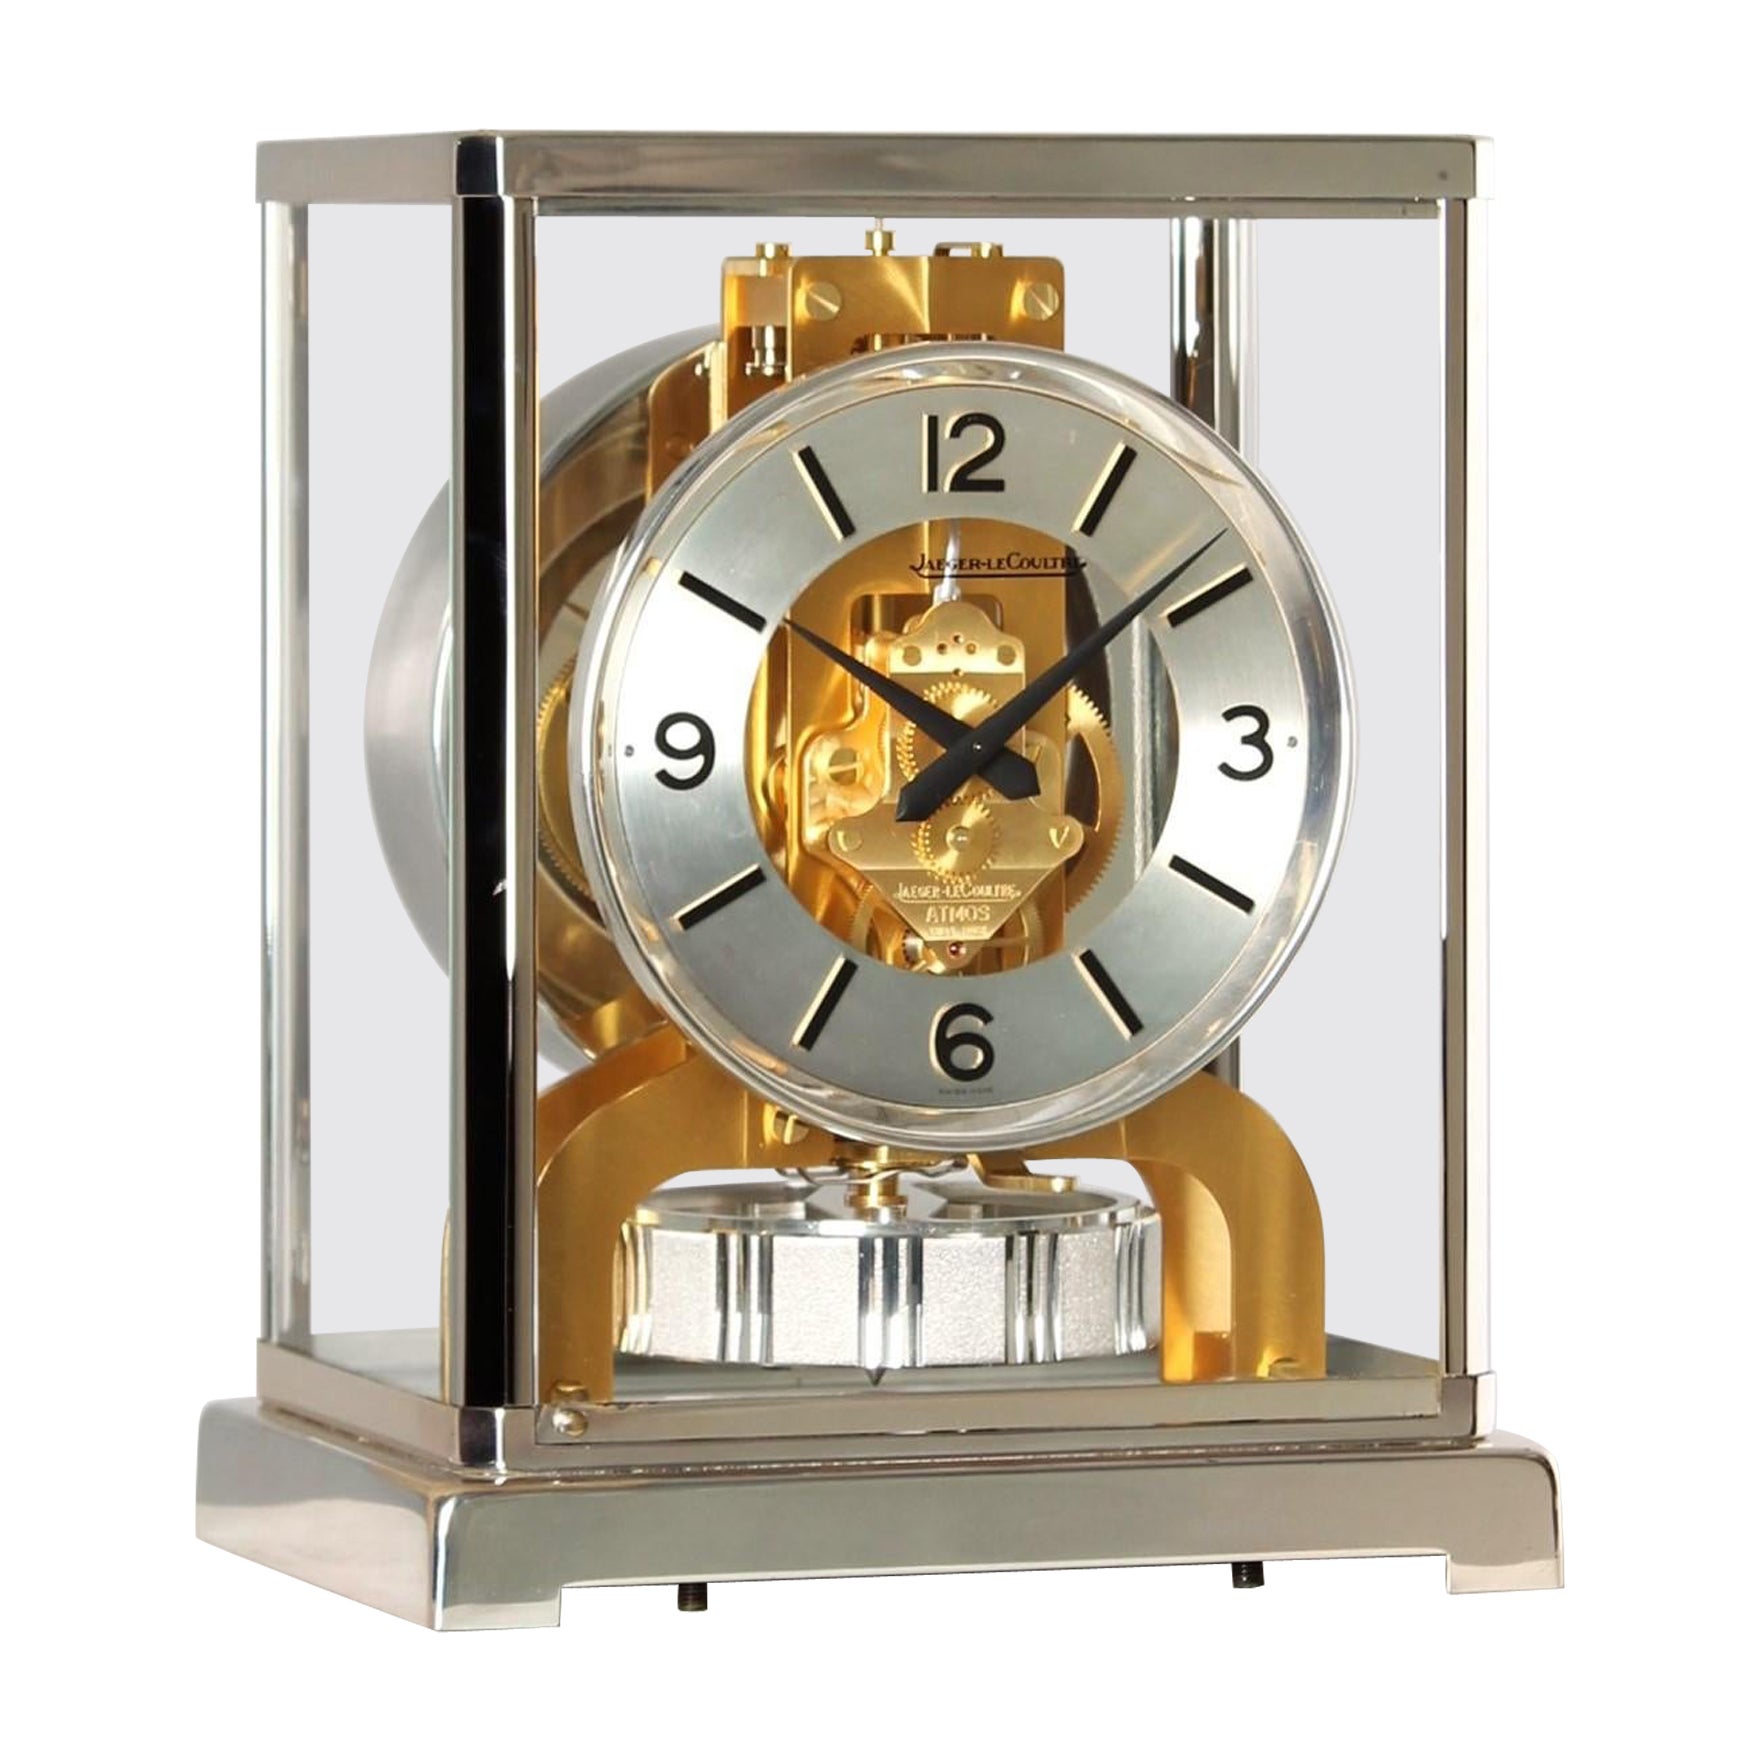 Jaeger LeCoultre, Bicolor Atmos Clock, Silver and Gold, Manufactured 1978